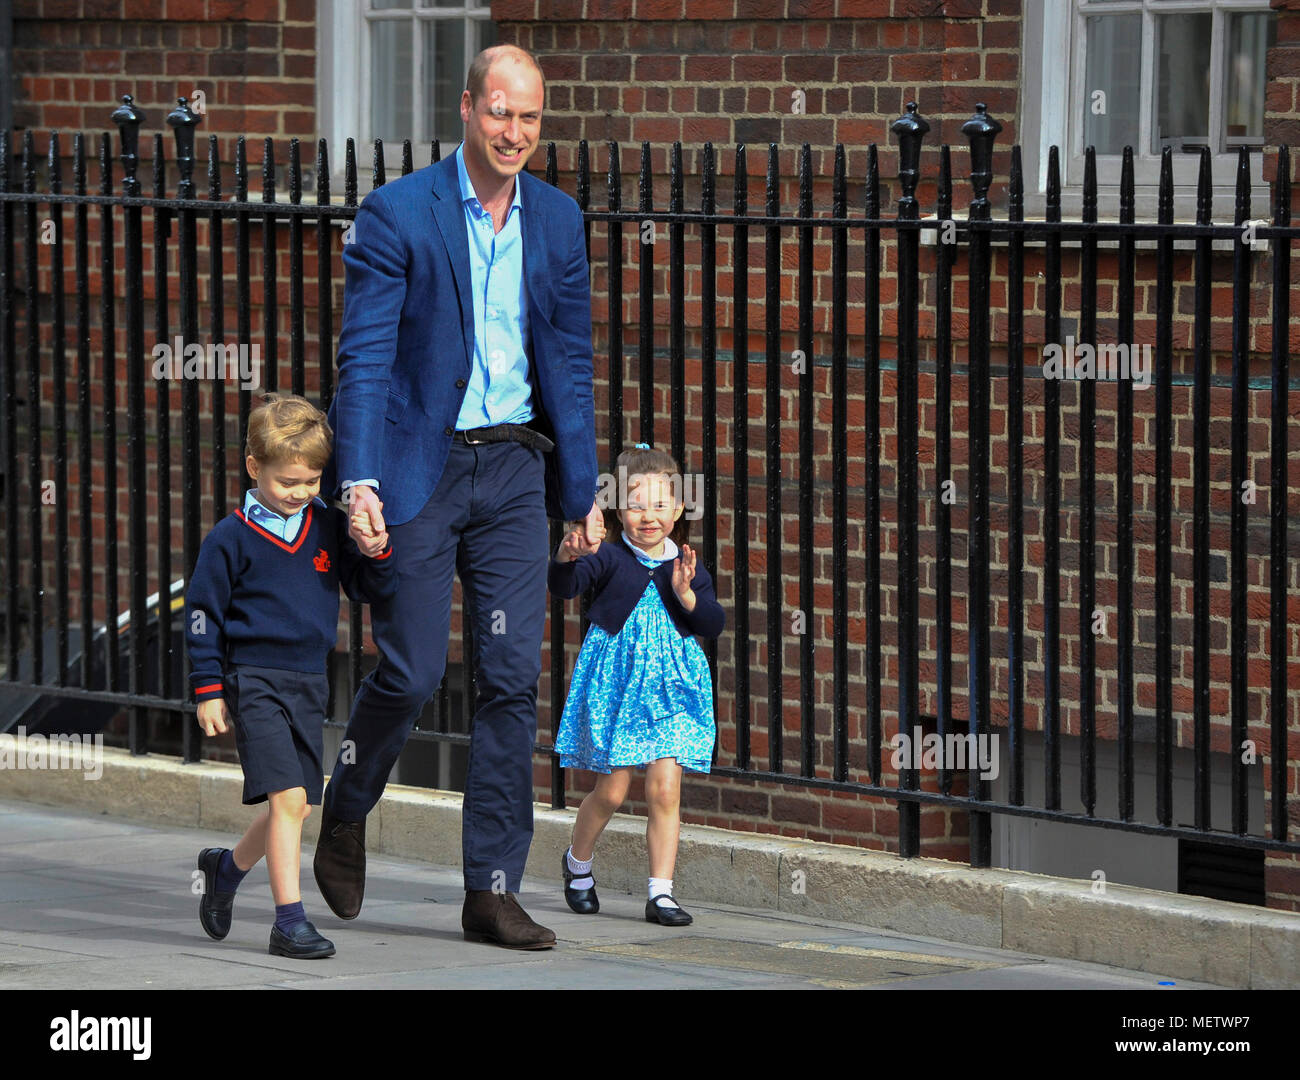 London, Britain. 23rd Apr, 2018. Britain's Prince William (C), Duke of Cambridge arrives with Prince George (L) and Princess Charlotte to visit Britain's Catherine, Duchess of Cambridge, who has given birth to a baby boy at St Mary's Hospital in London, Britain, on April 23, 2018. Princess Kate on Monday gave birth to a boy, her third child, who is the fifth in line to the British throne. Credit: Stephen Chung/Xinhua/Alamy Live News Stock Photo